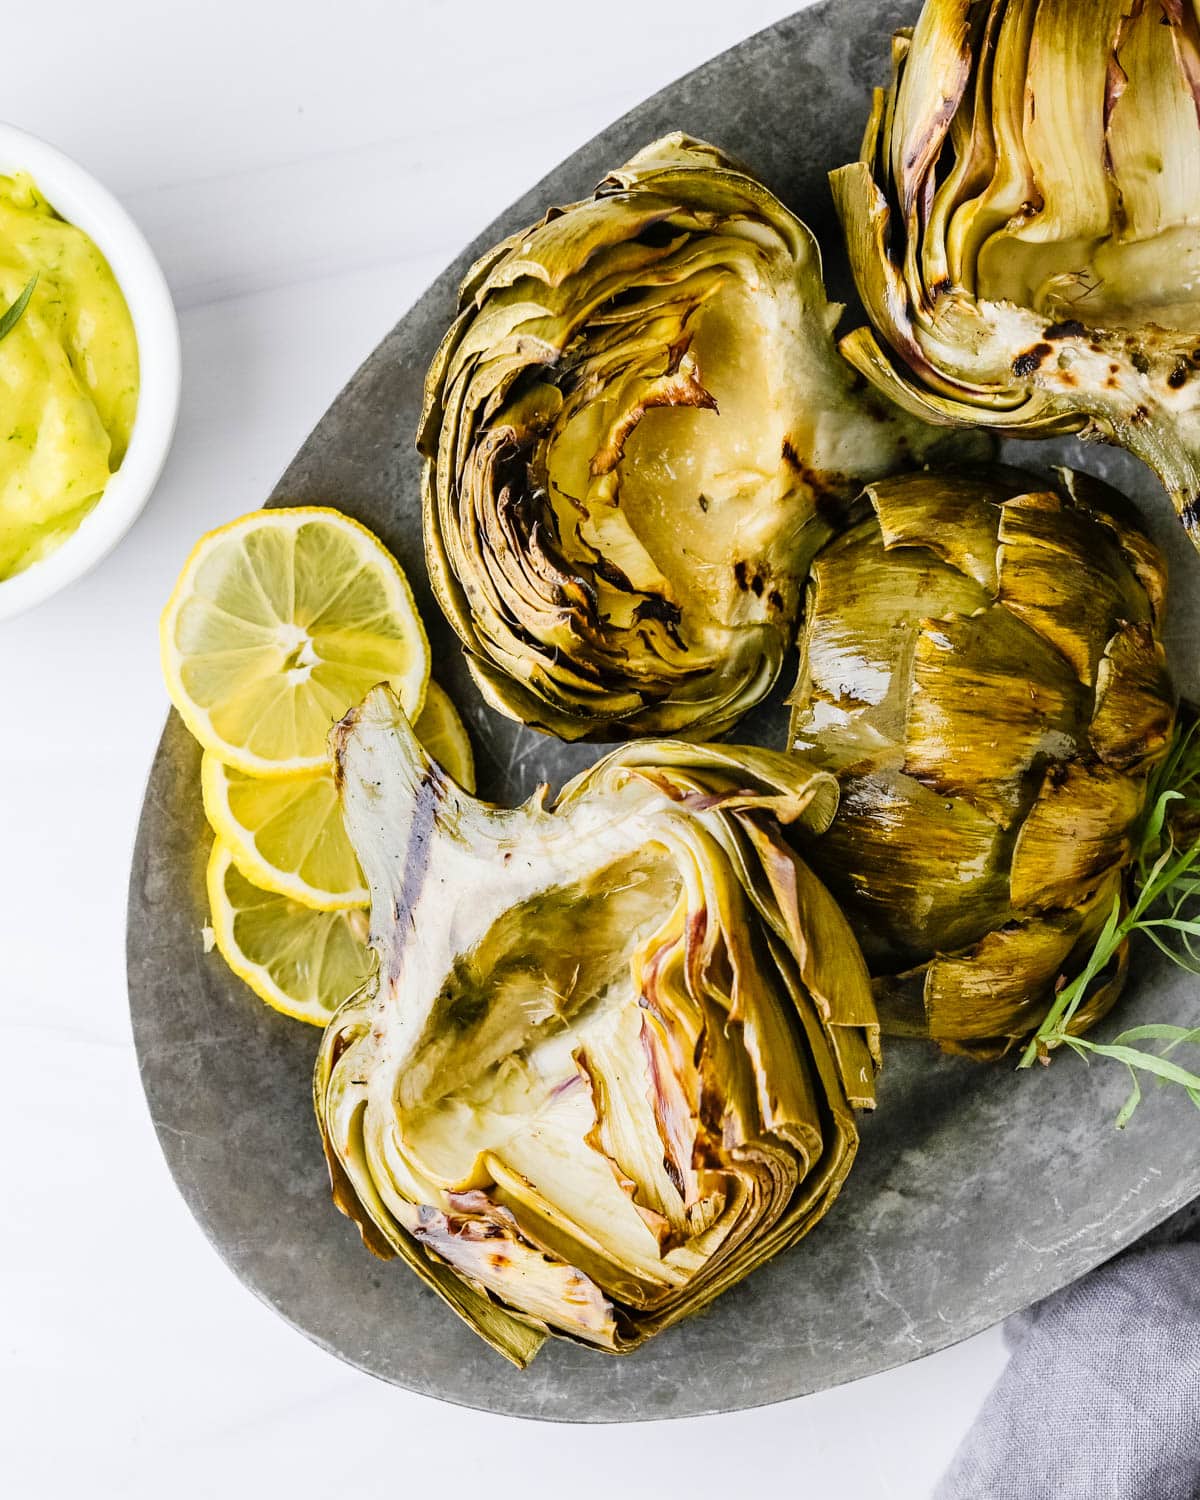 Grilled artichokes on a pewter platter.